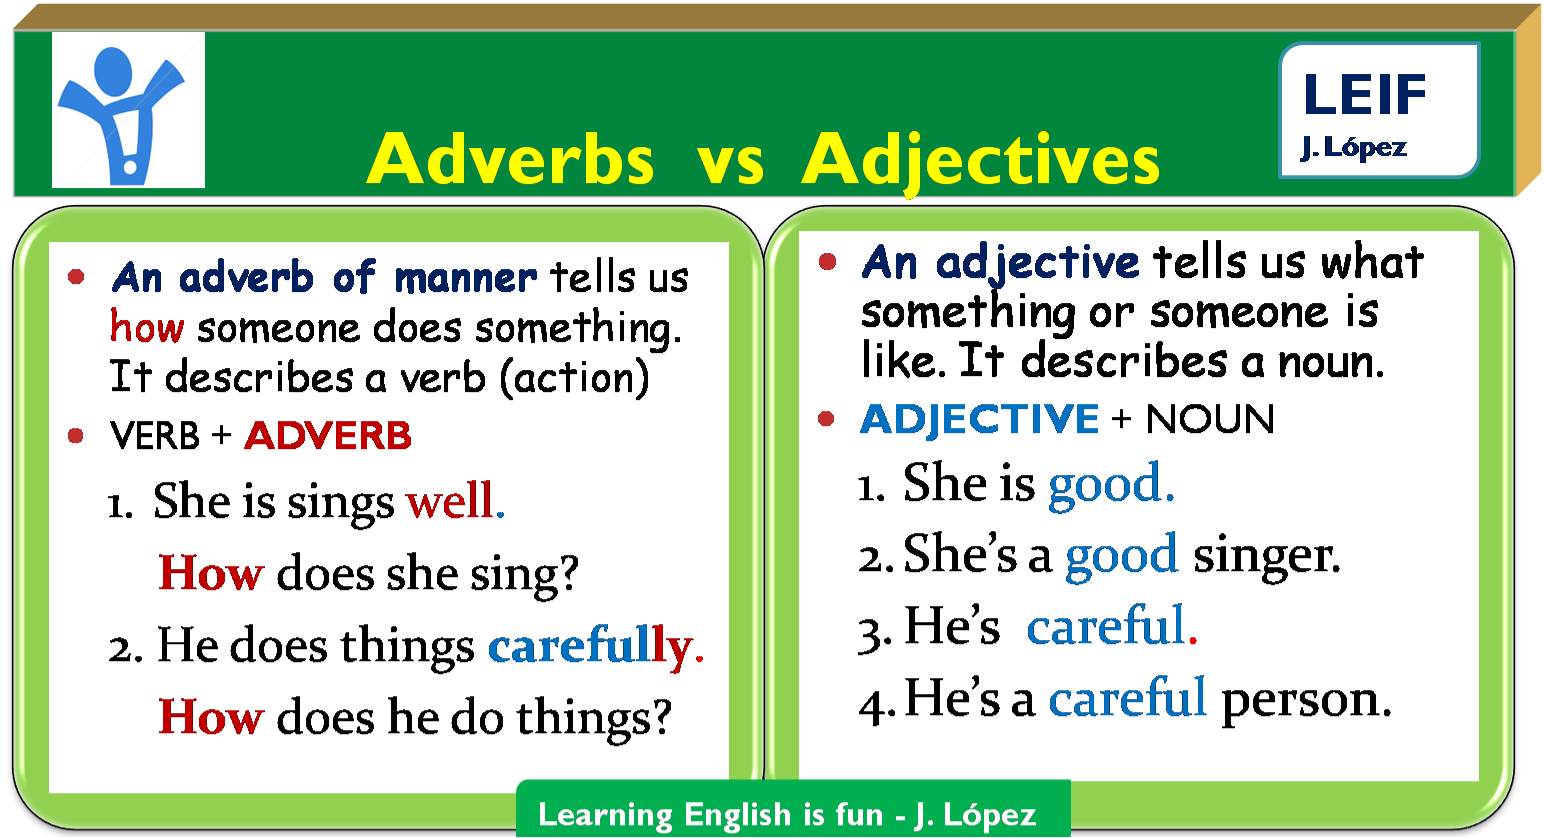 Adjectives and adverbs правило. Adverbs правило. Adverbs правила. Adverbs and adjectives правила. Adverbs rules